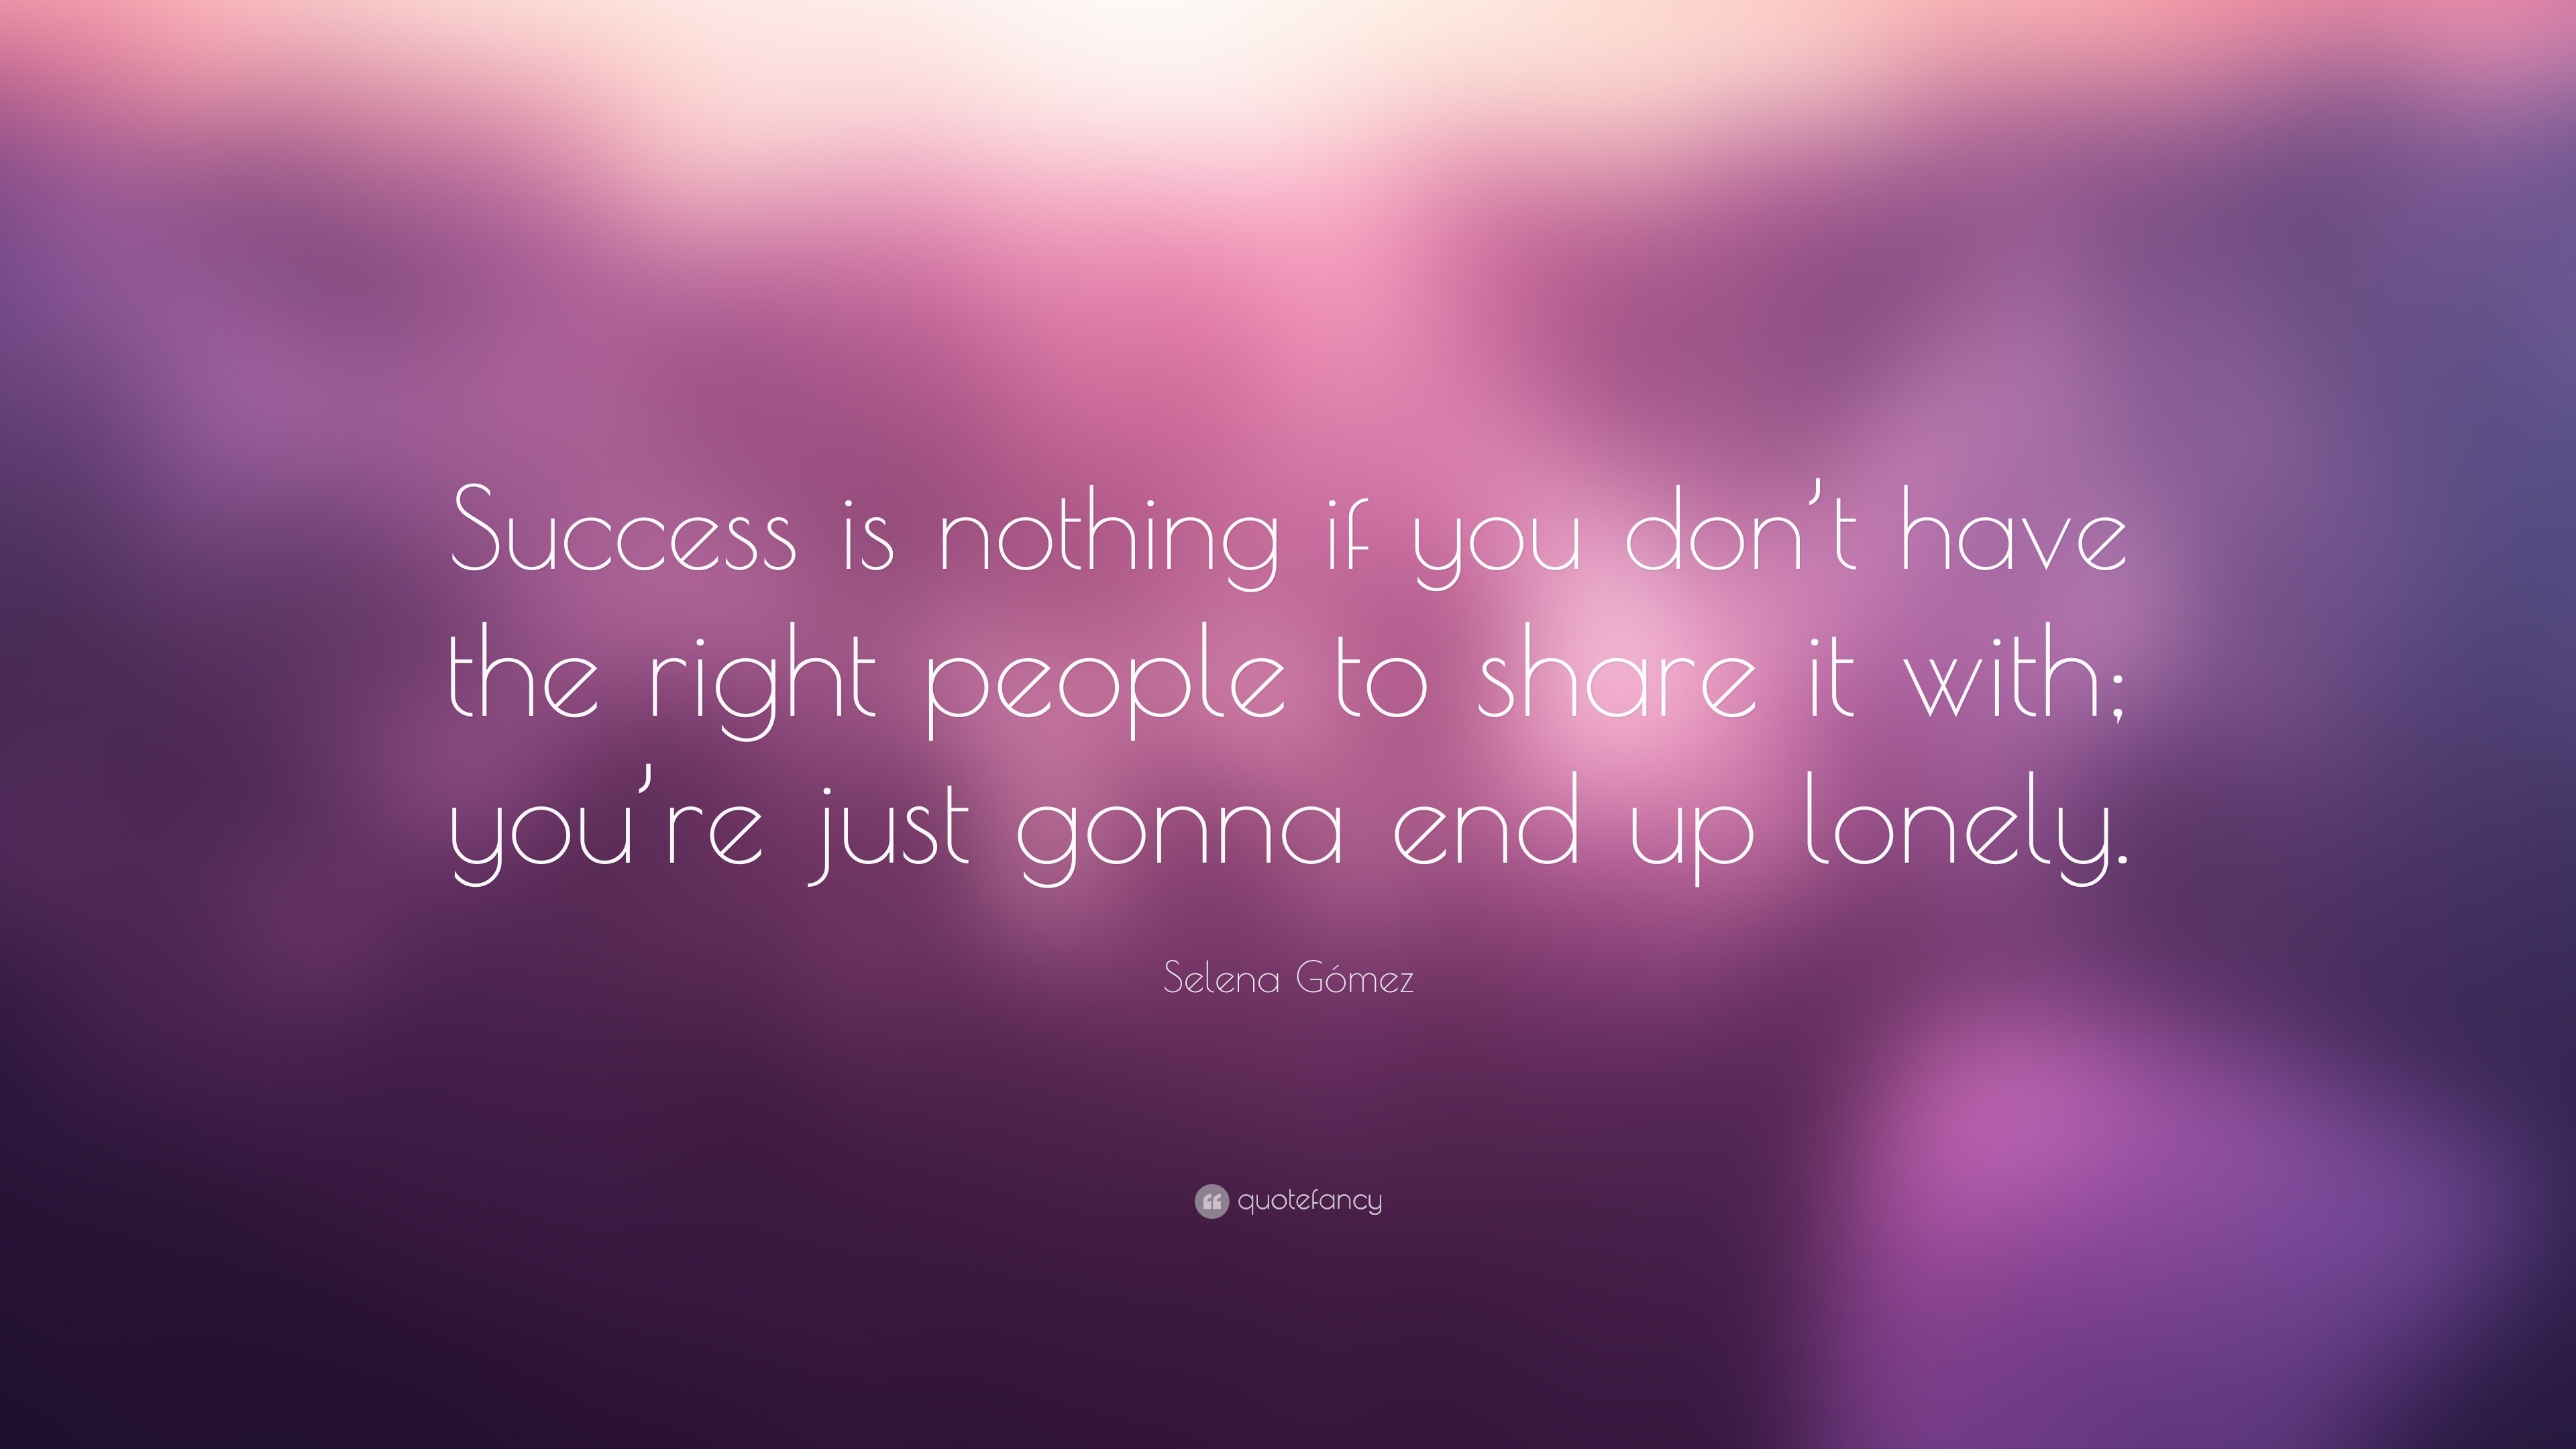 Selena Gómez Quote: “Success is nothing if you don’t have the right ...